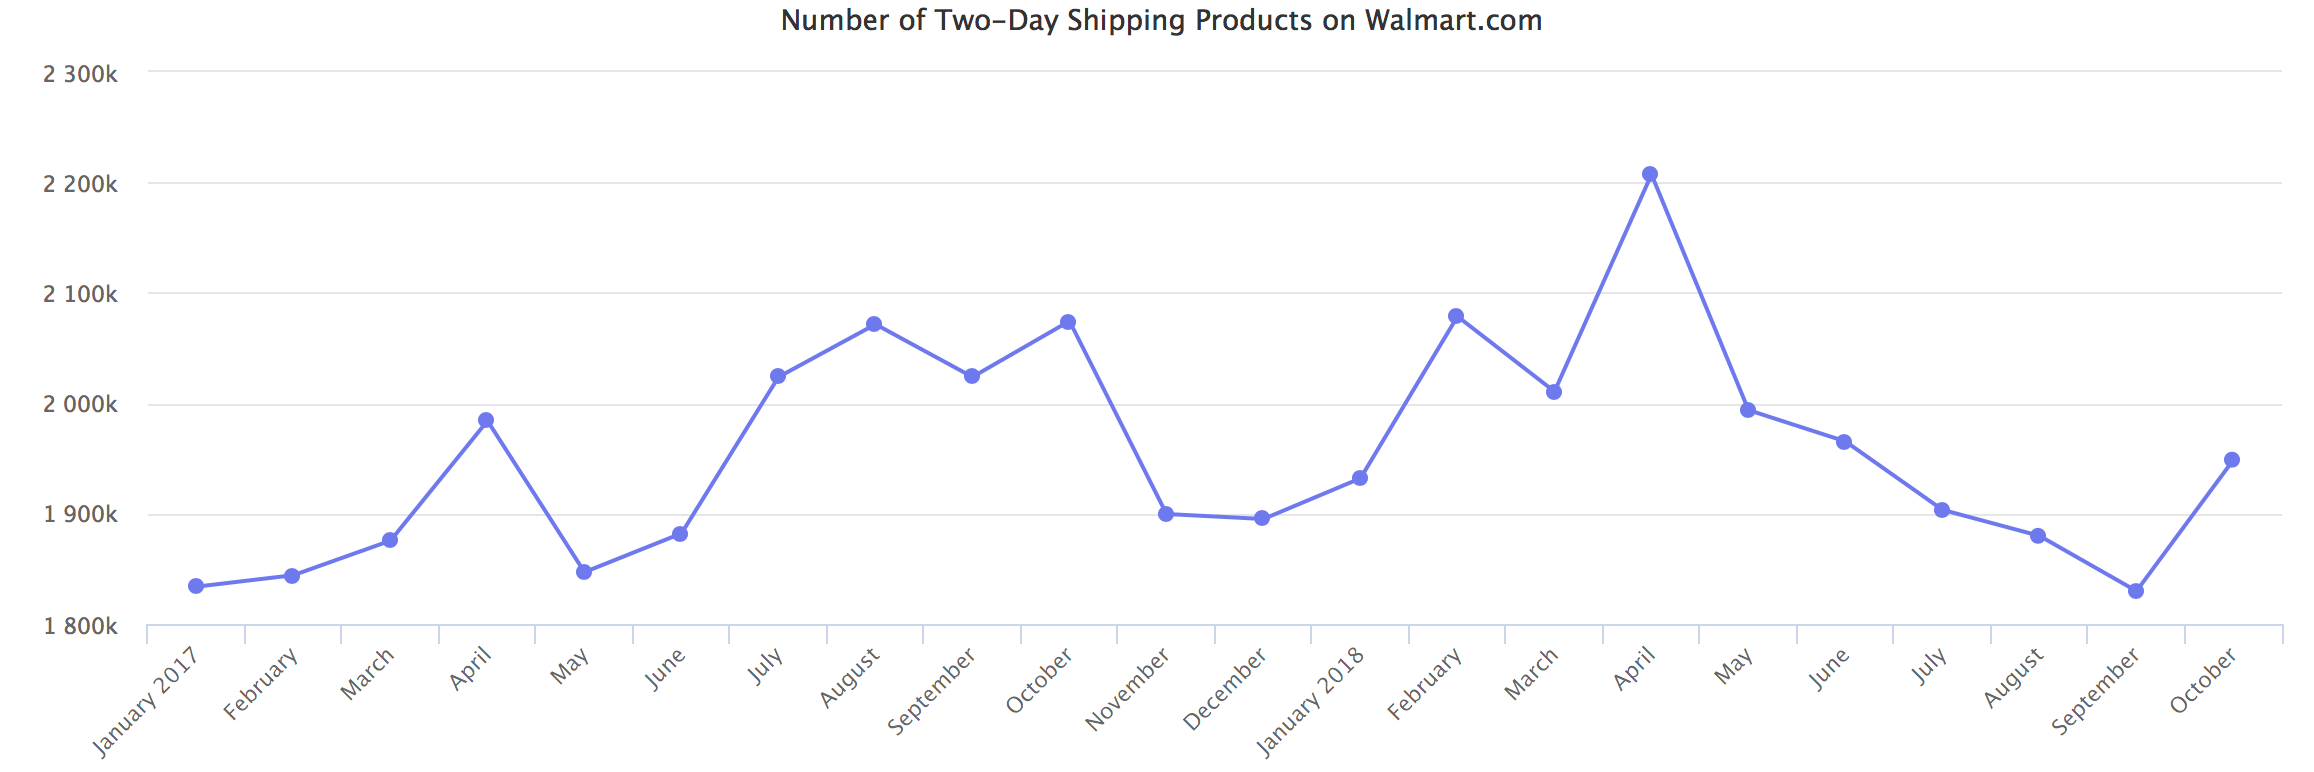 Walmart Number of Two Day Shipping Products